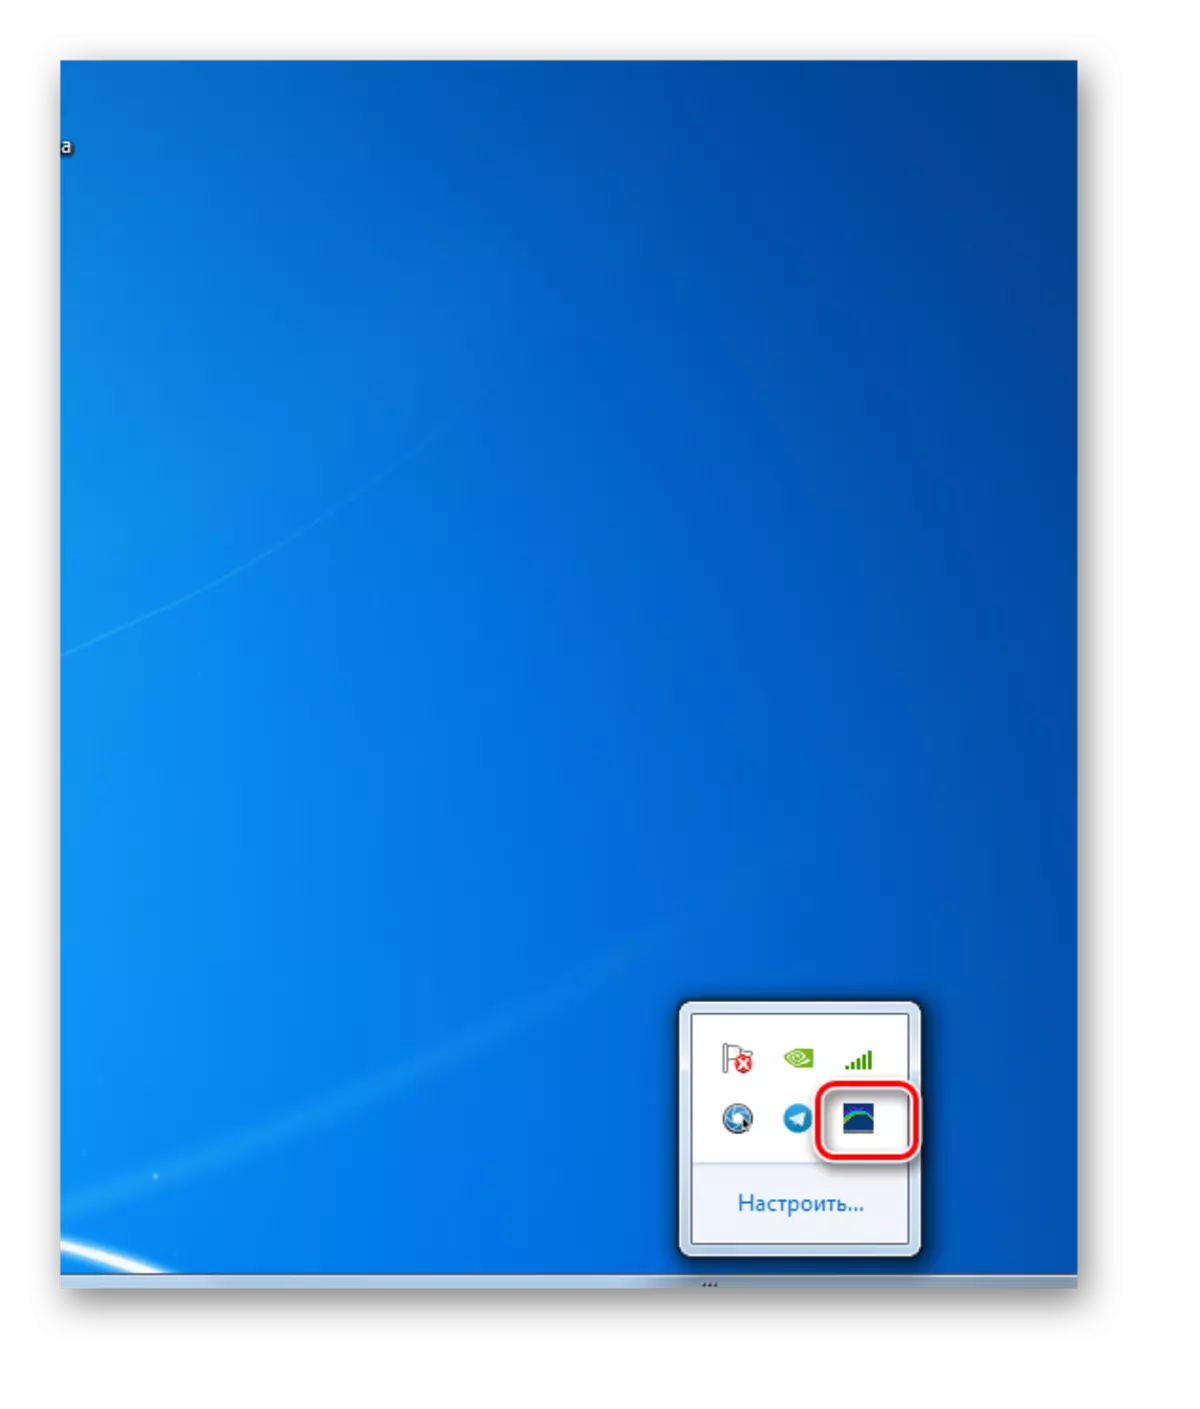 TaskBar Color Effects program icon in the system tray in Windows 7